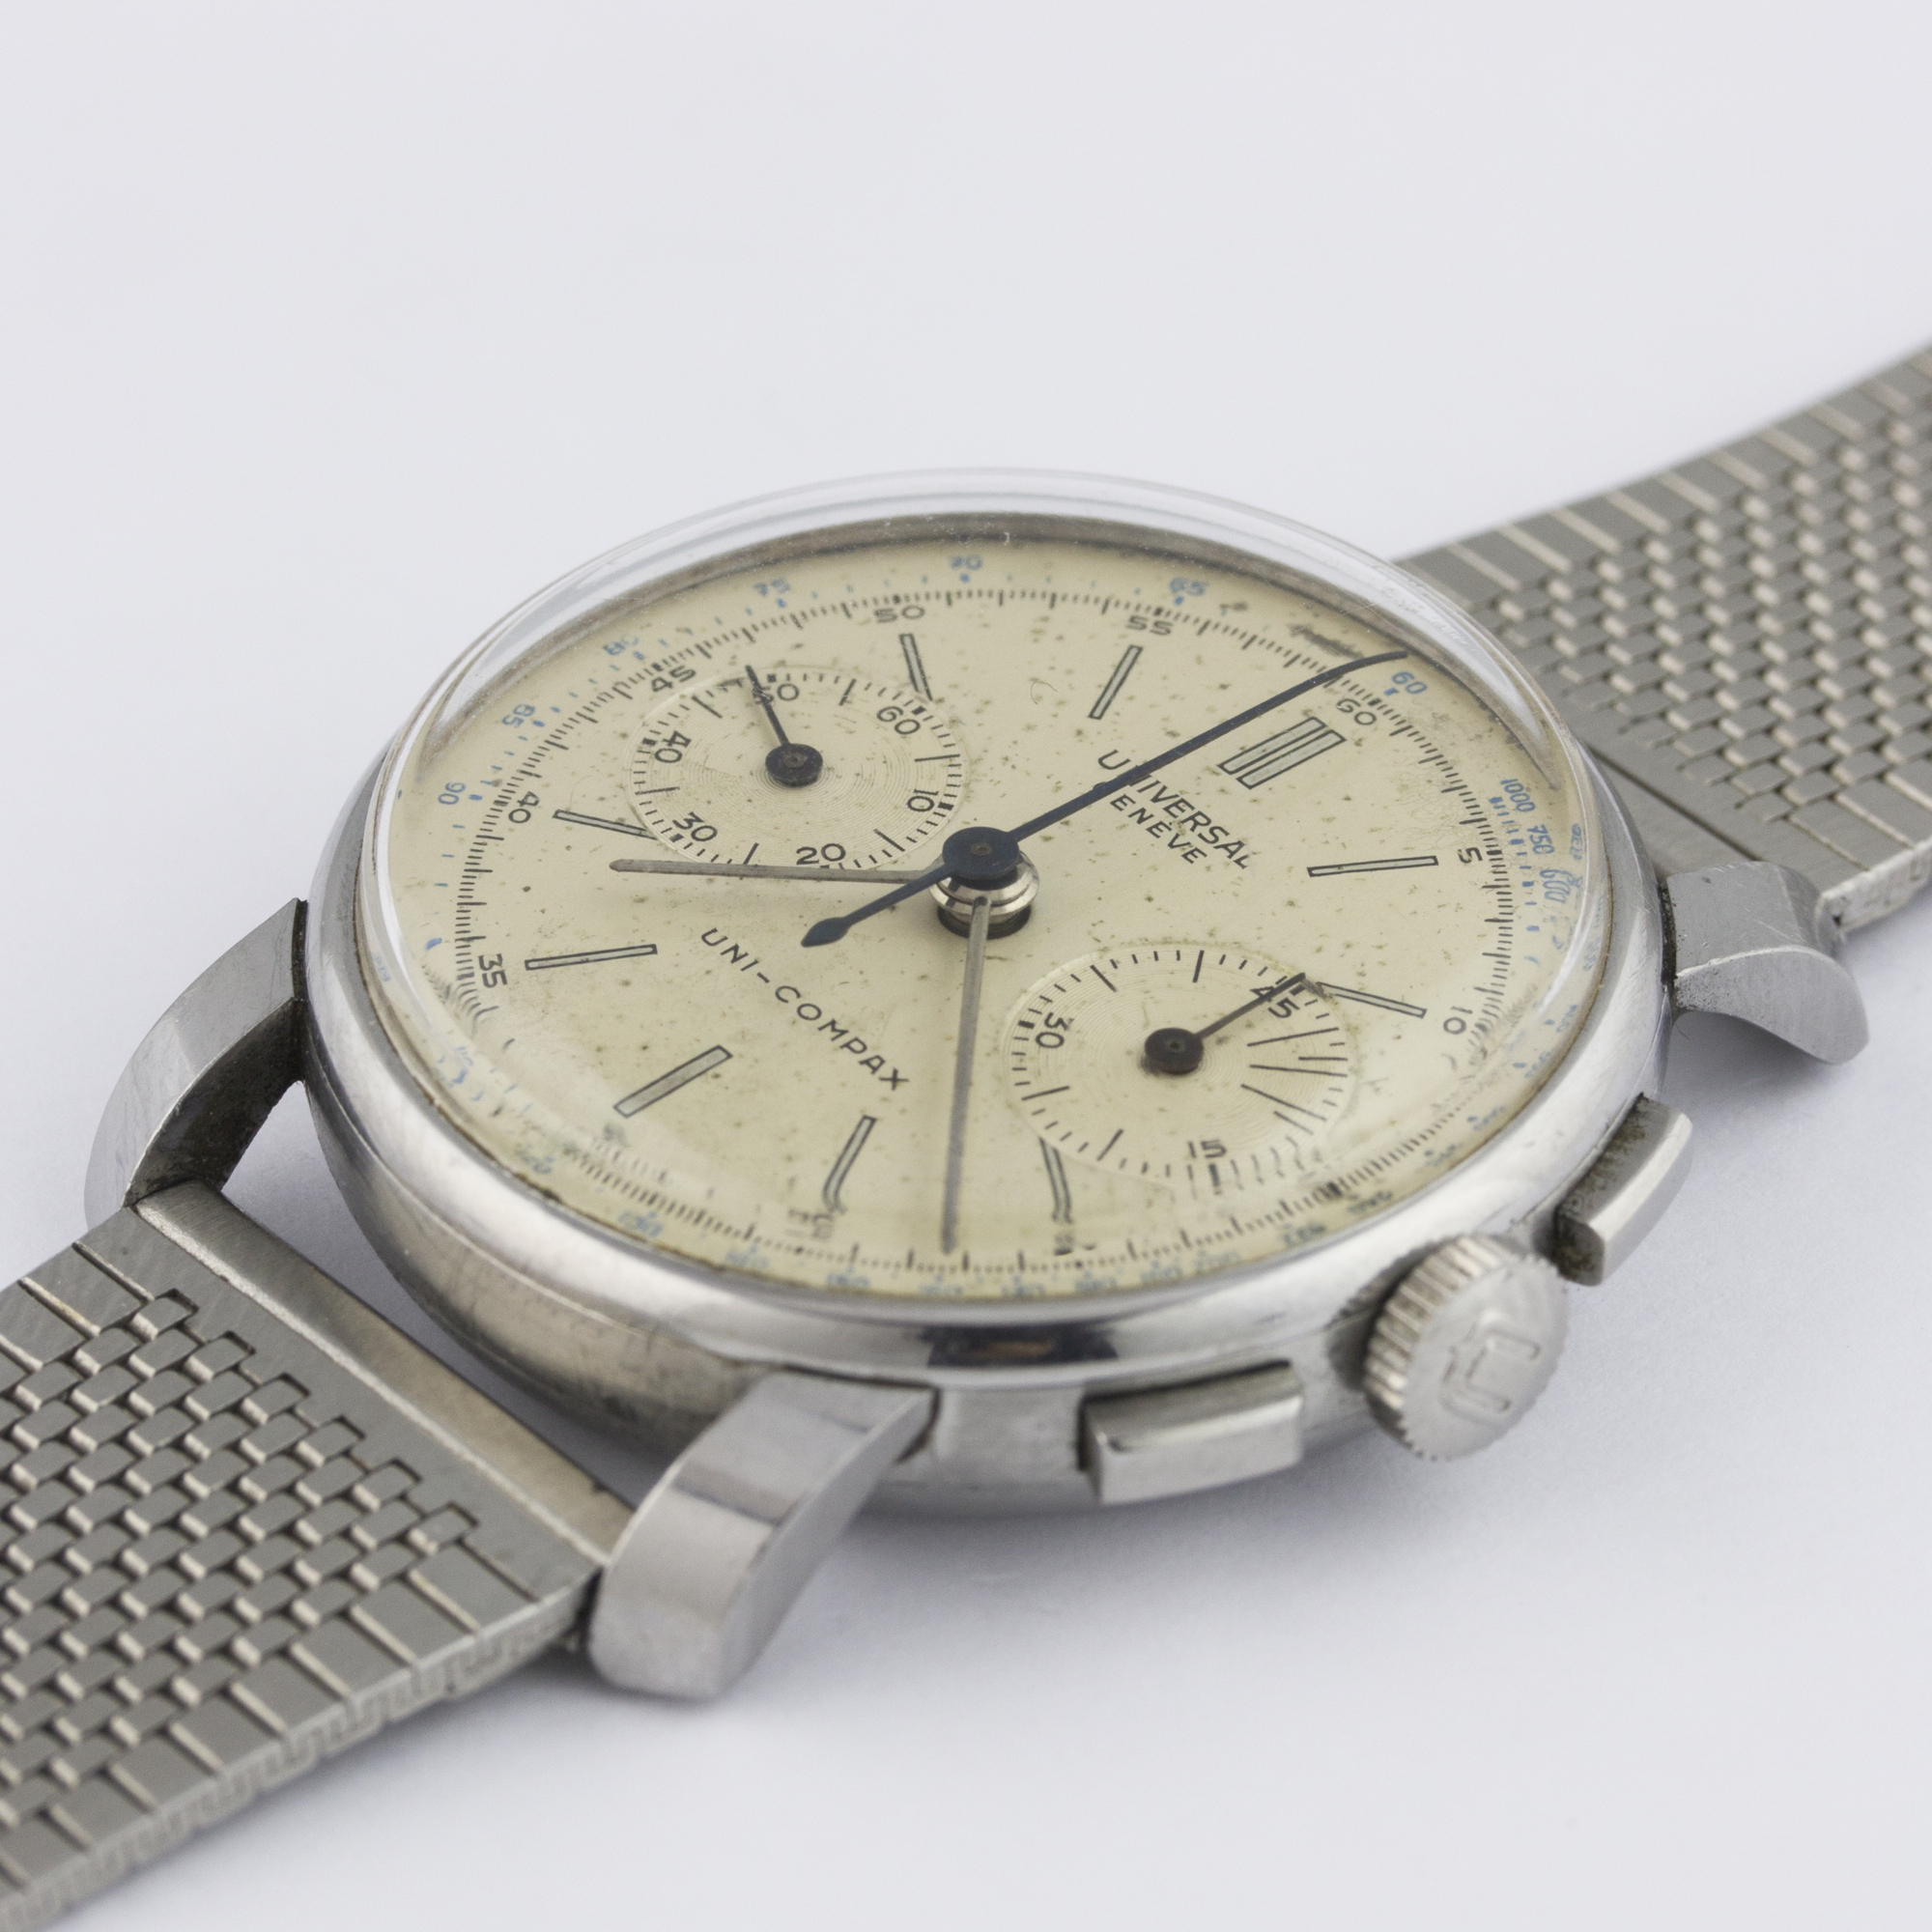 A GENTLEMAN'S STAINLESS STEEL UNIVERSAL GENEVE UNI COMPAX CHRONOGRAPH WRIST WATCH CIRCA 1940s D: - Image 3 of 8